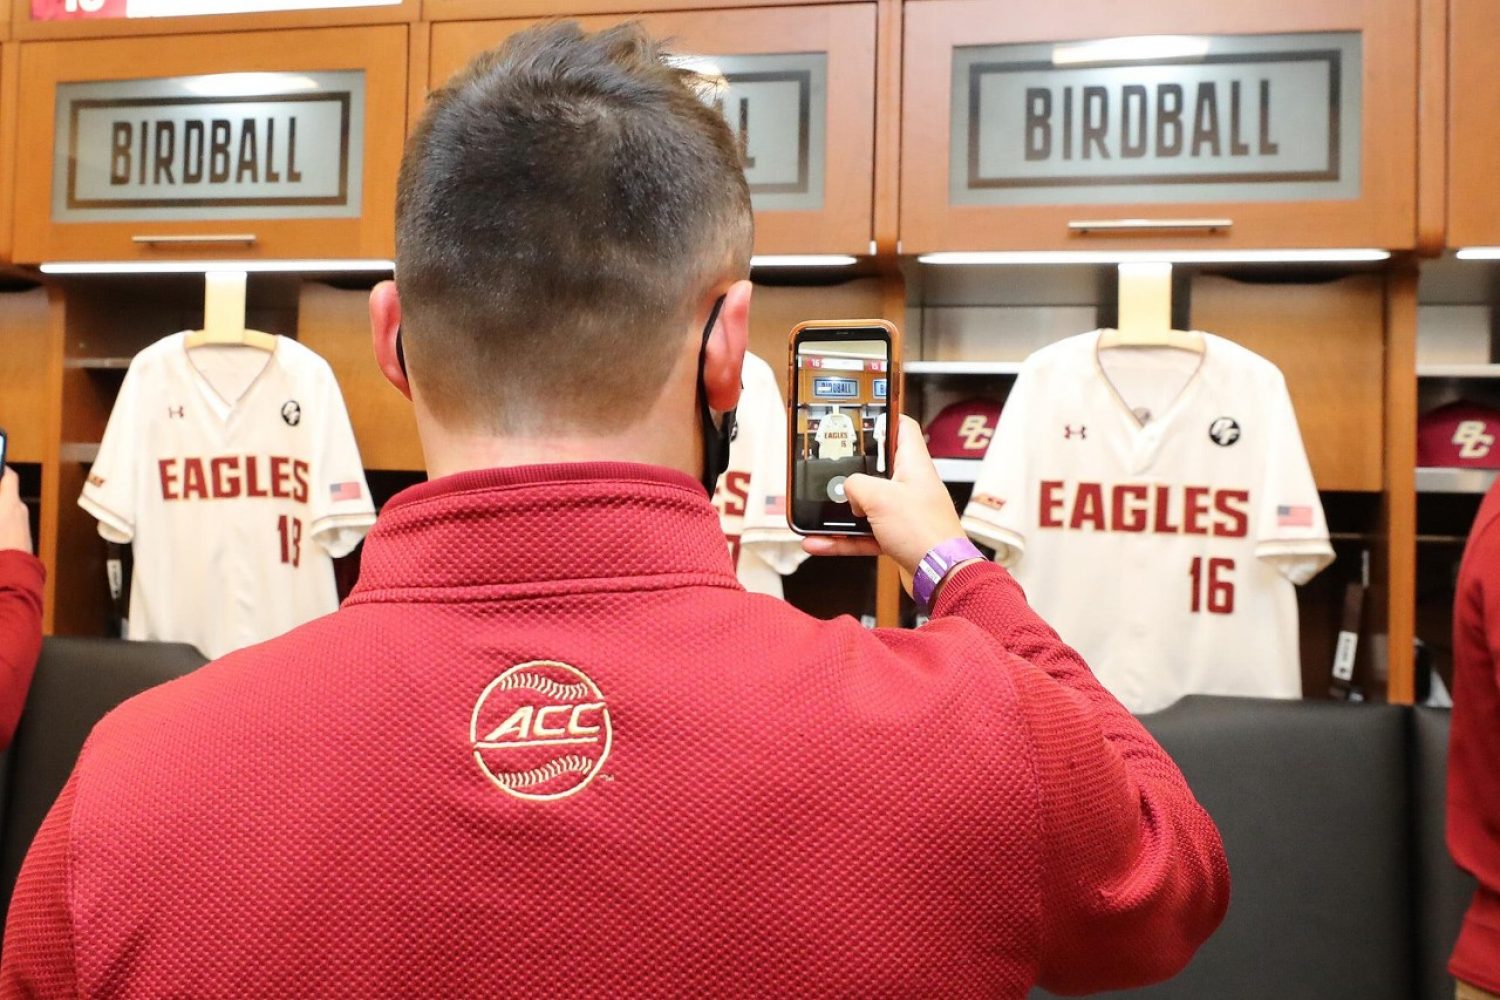 A student takes a photo of a locker room